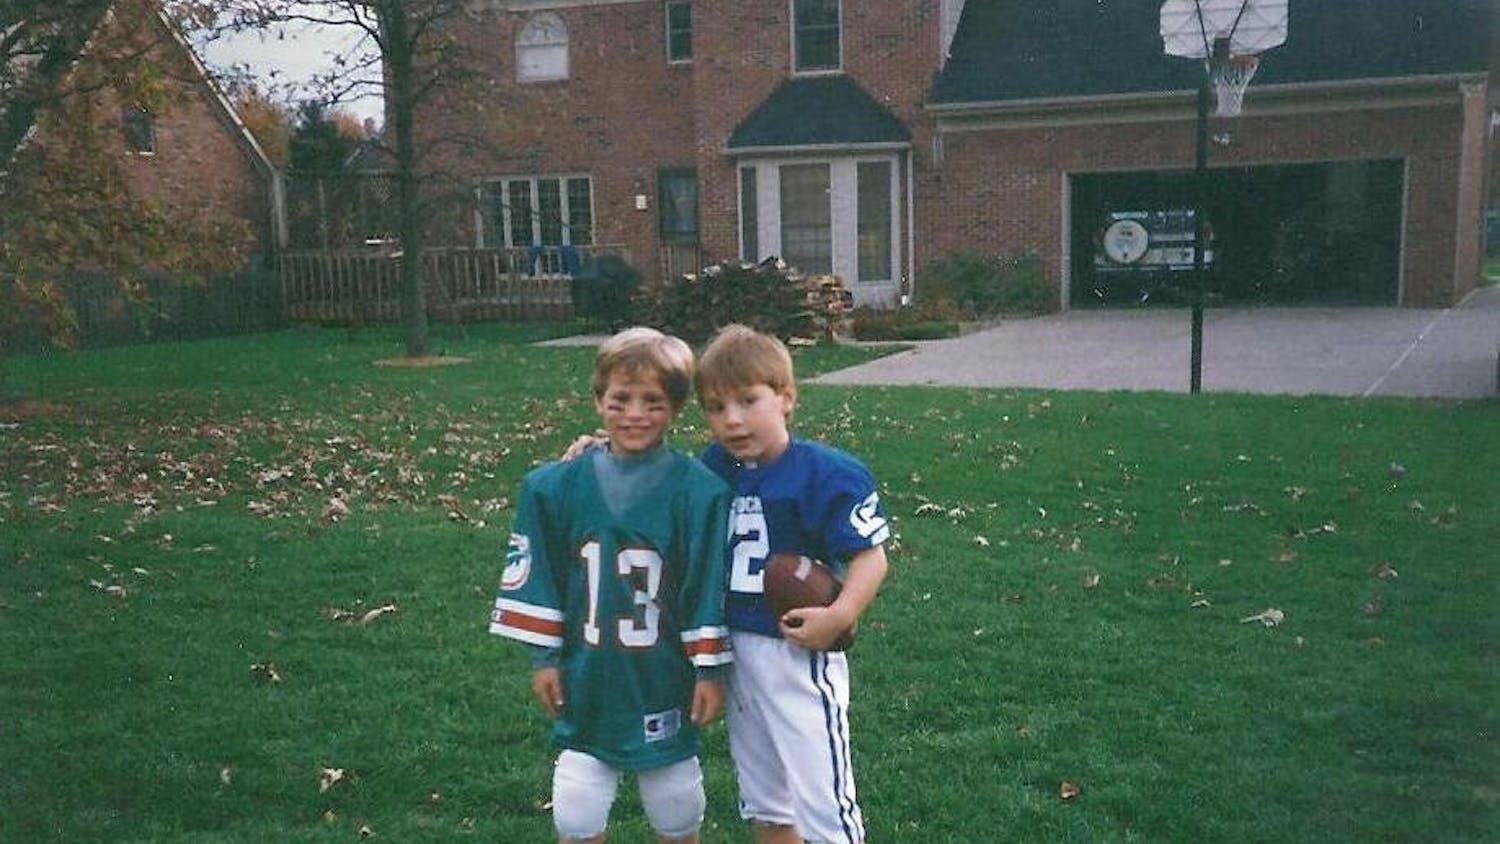 Logan Eberly is the brother of Keaton Eberly. The Super Bowl, and football in general, was a big part of the Eberly brothers' lives growing up.&nbsp;Photo courtesy of Keaton Eberly